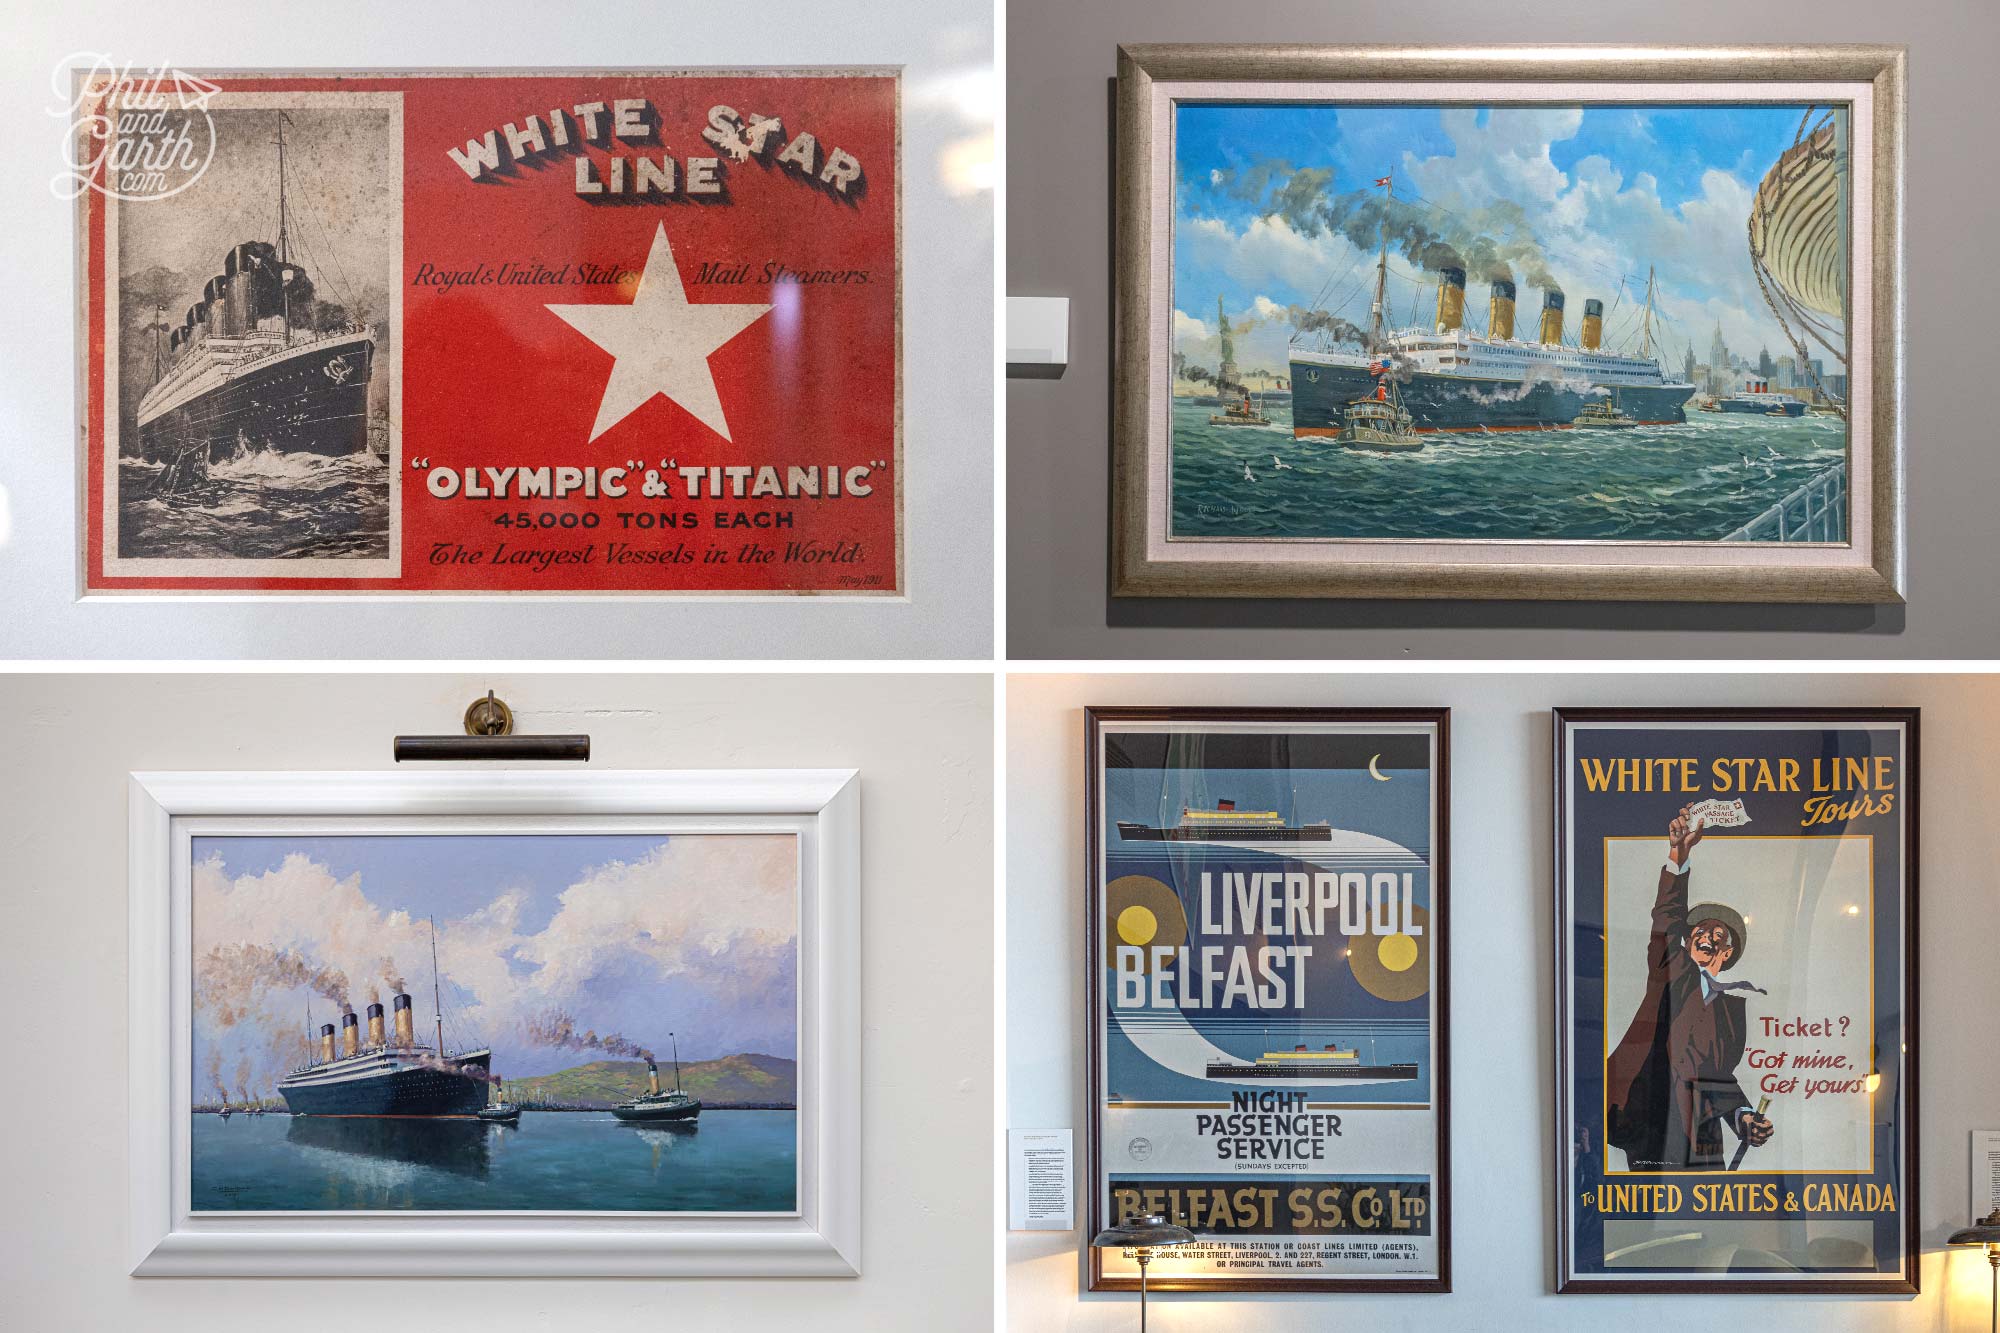 Titanic Hotel Belfast has over 500 Titanic artefacts, photographs and artworks